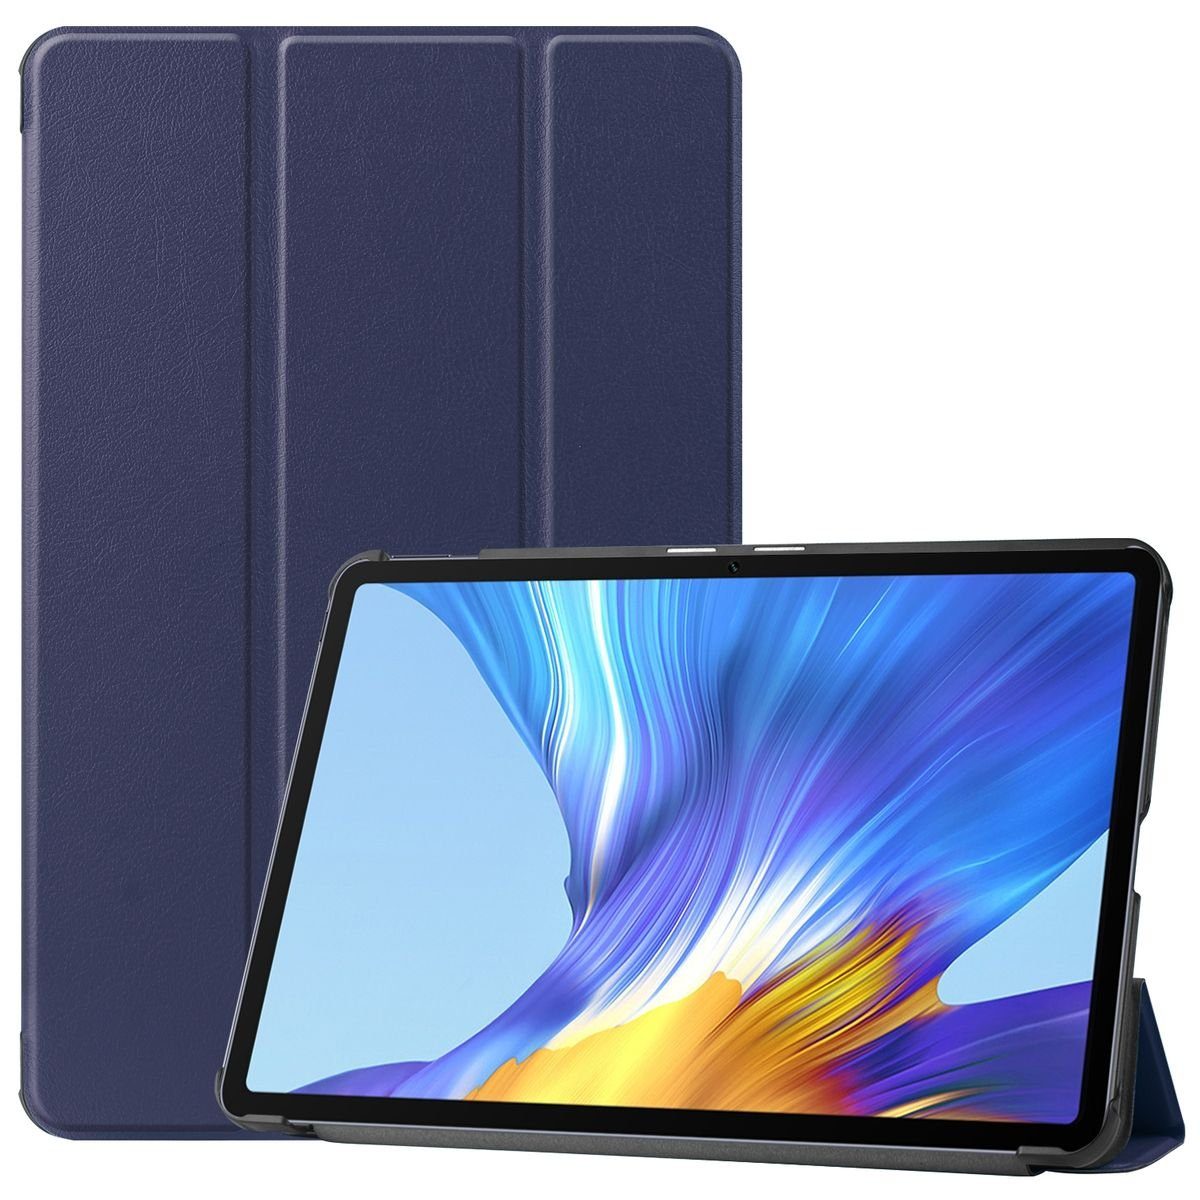 Wigento Tablet-Hülle Für Huawei MatePad 2020 10.4 Zoll Tablet Tasche 3 folt  Wake UP Smart Cover Etuis